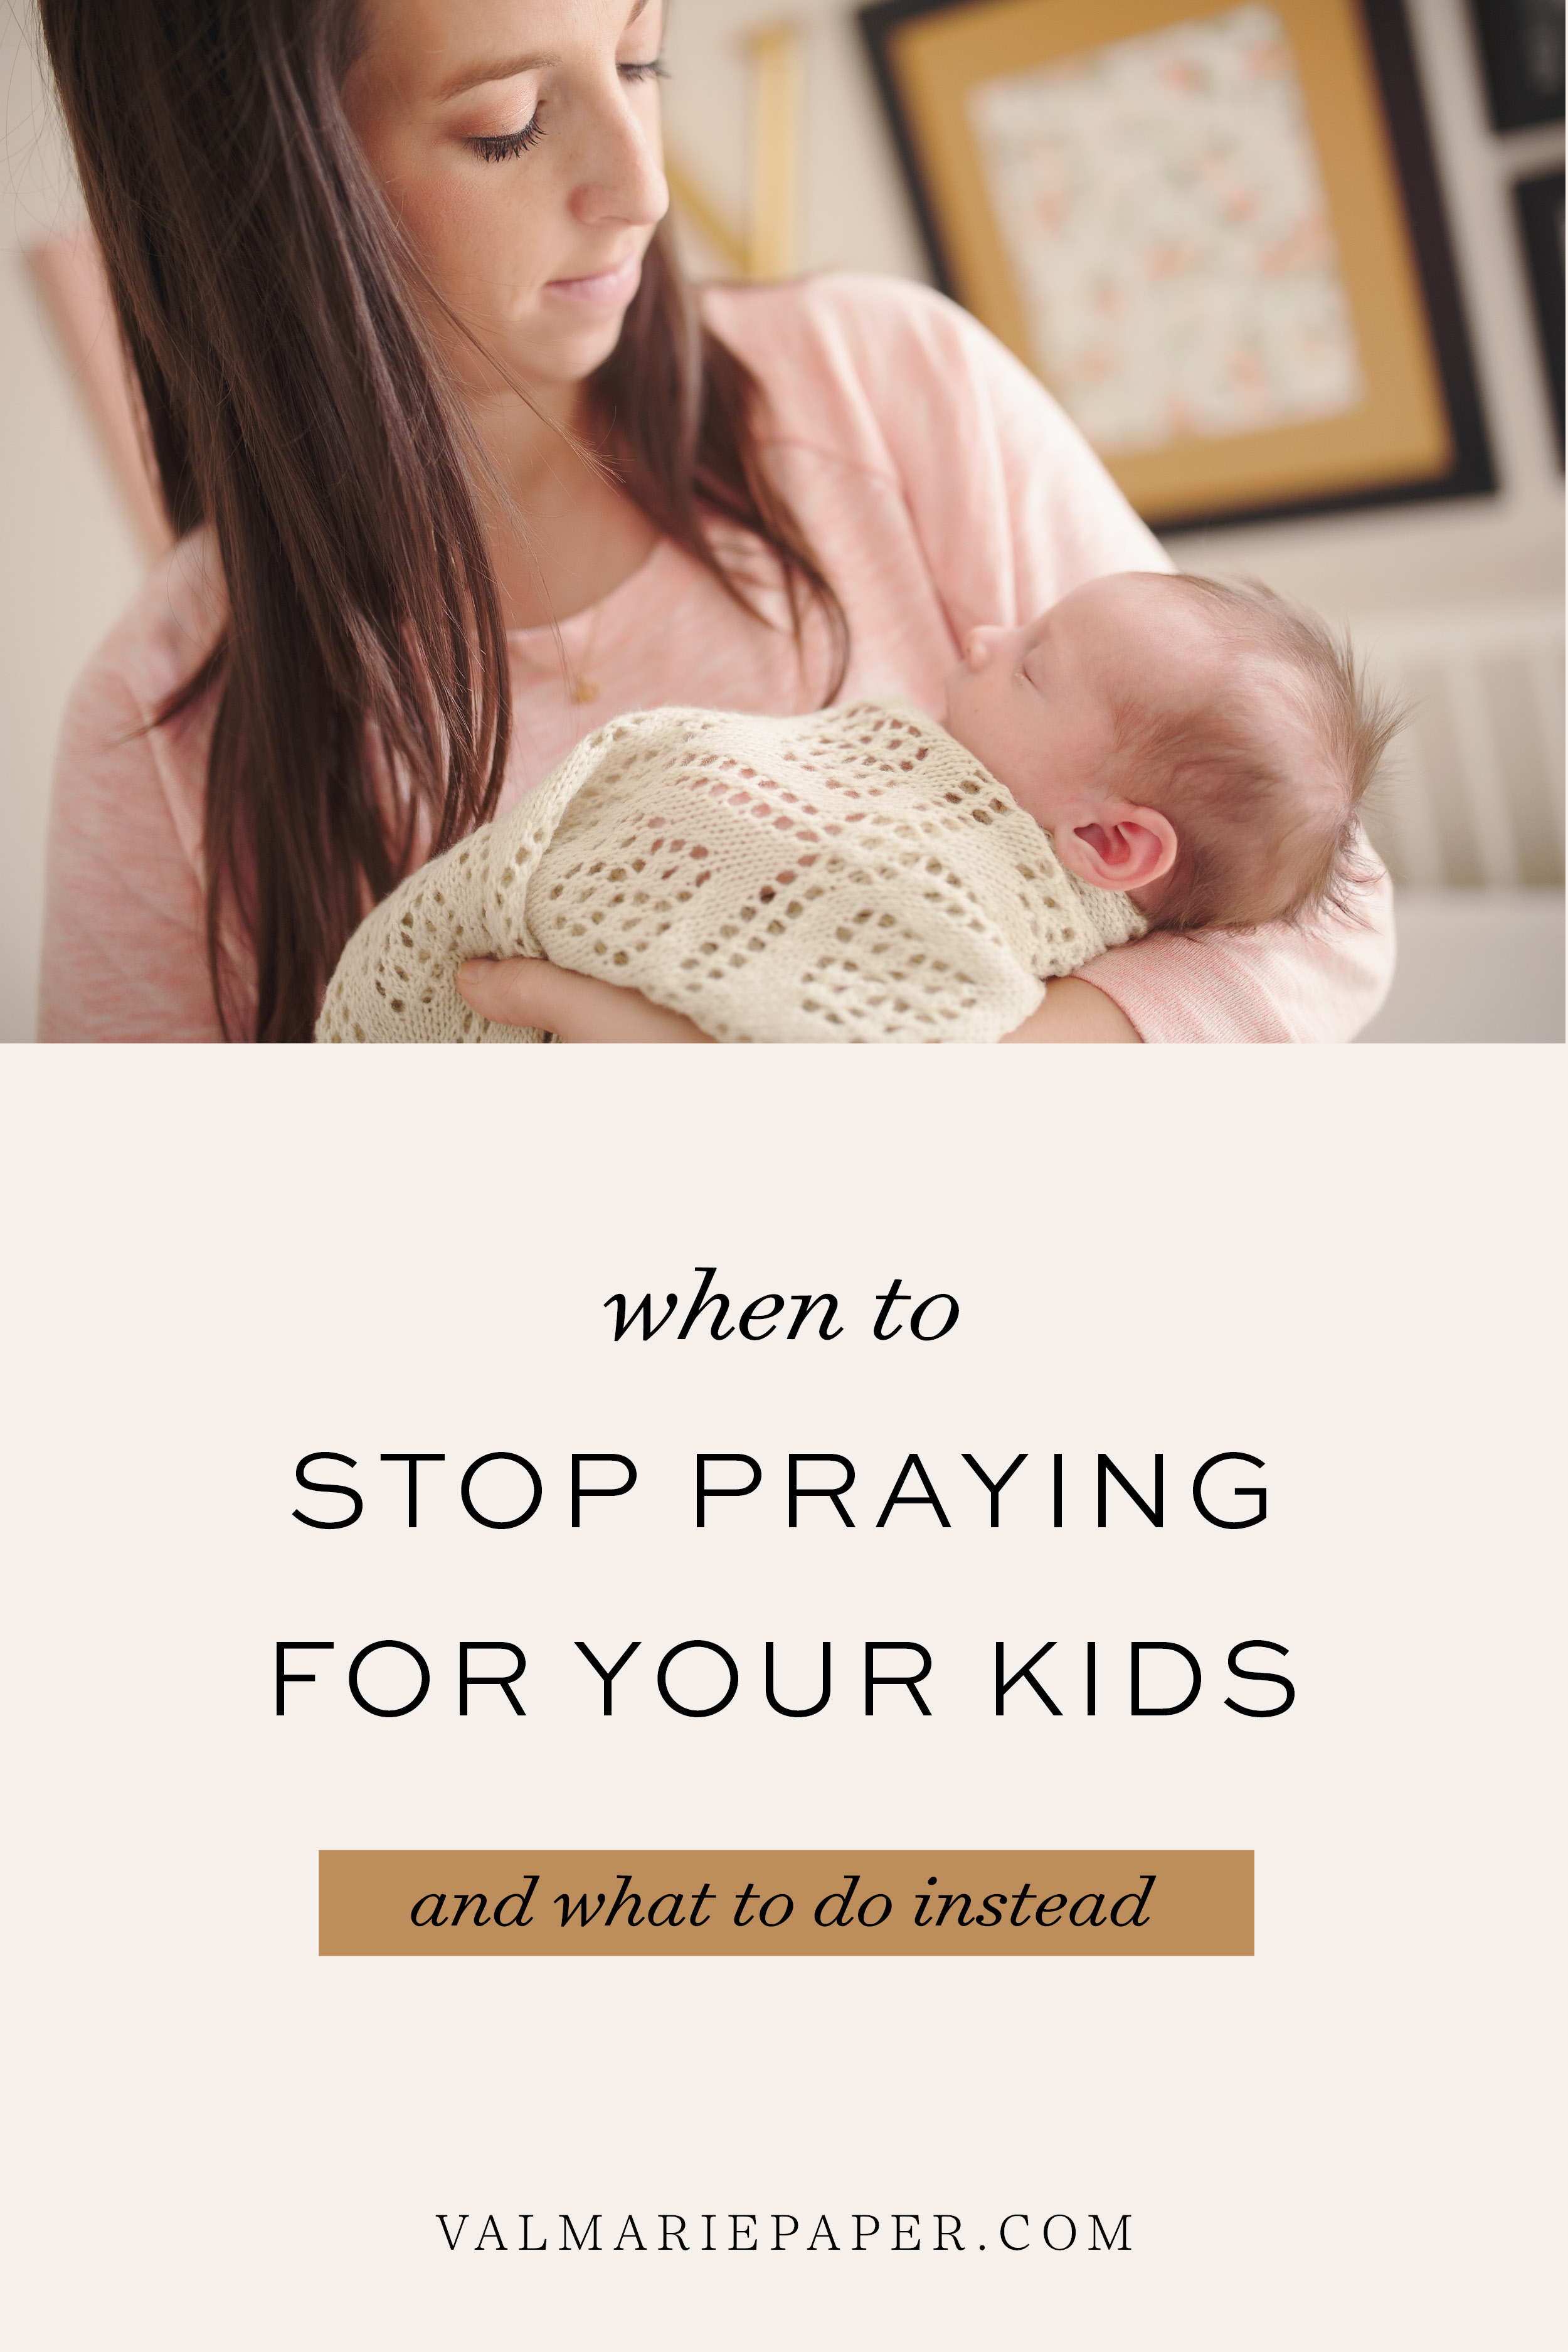 When We Don't Need to Prayer for our Kids by Valerie Woerner, motherhood, Val Marie Paper, children, pregnancy, faith, mom life, prayer, parenting, Christian